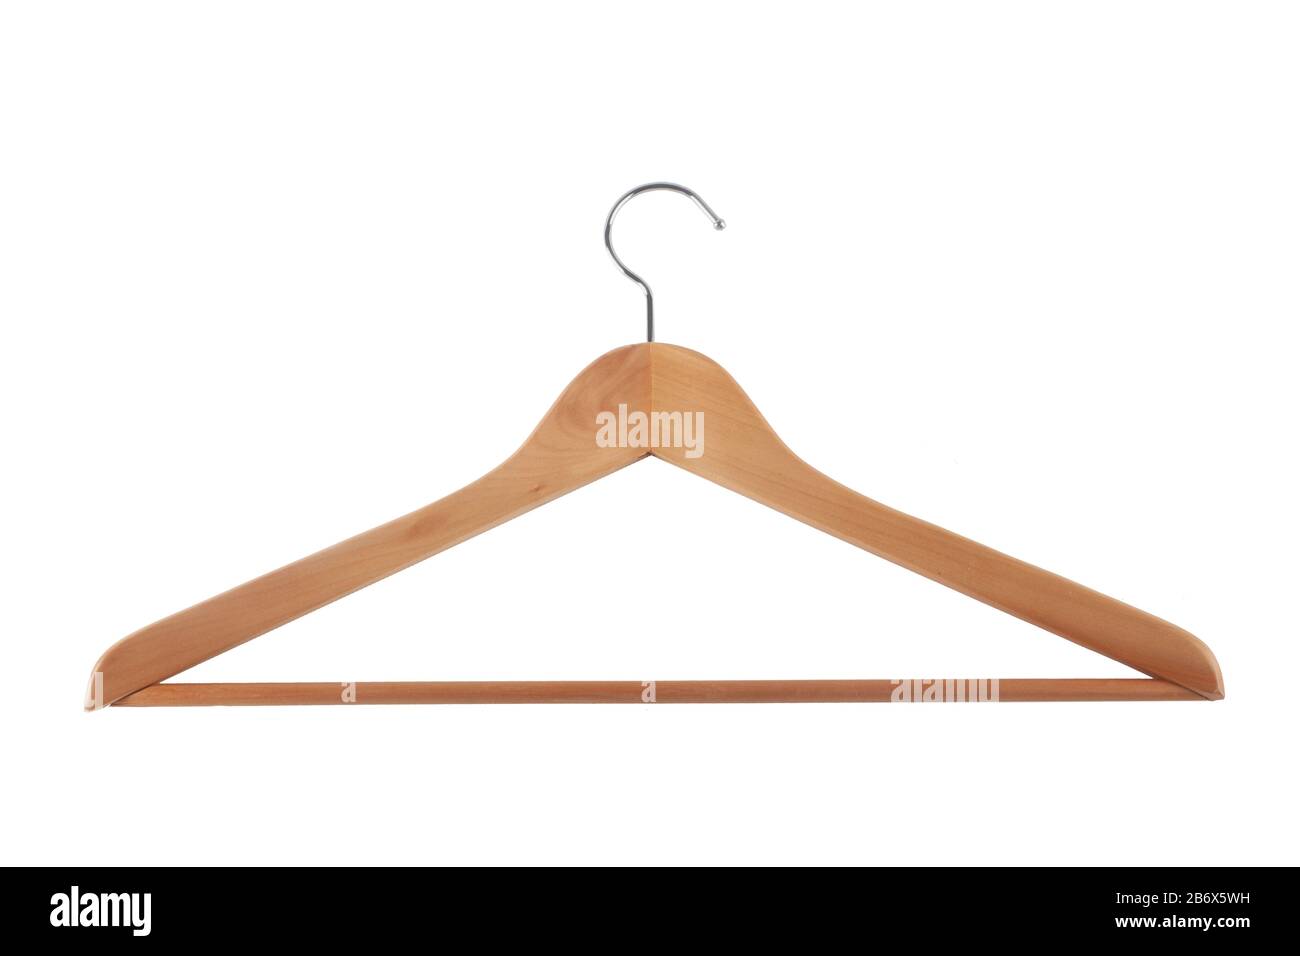 Studio shot of a wooden hanger isolated on white background Stock Photo